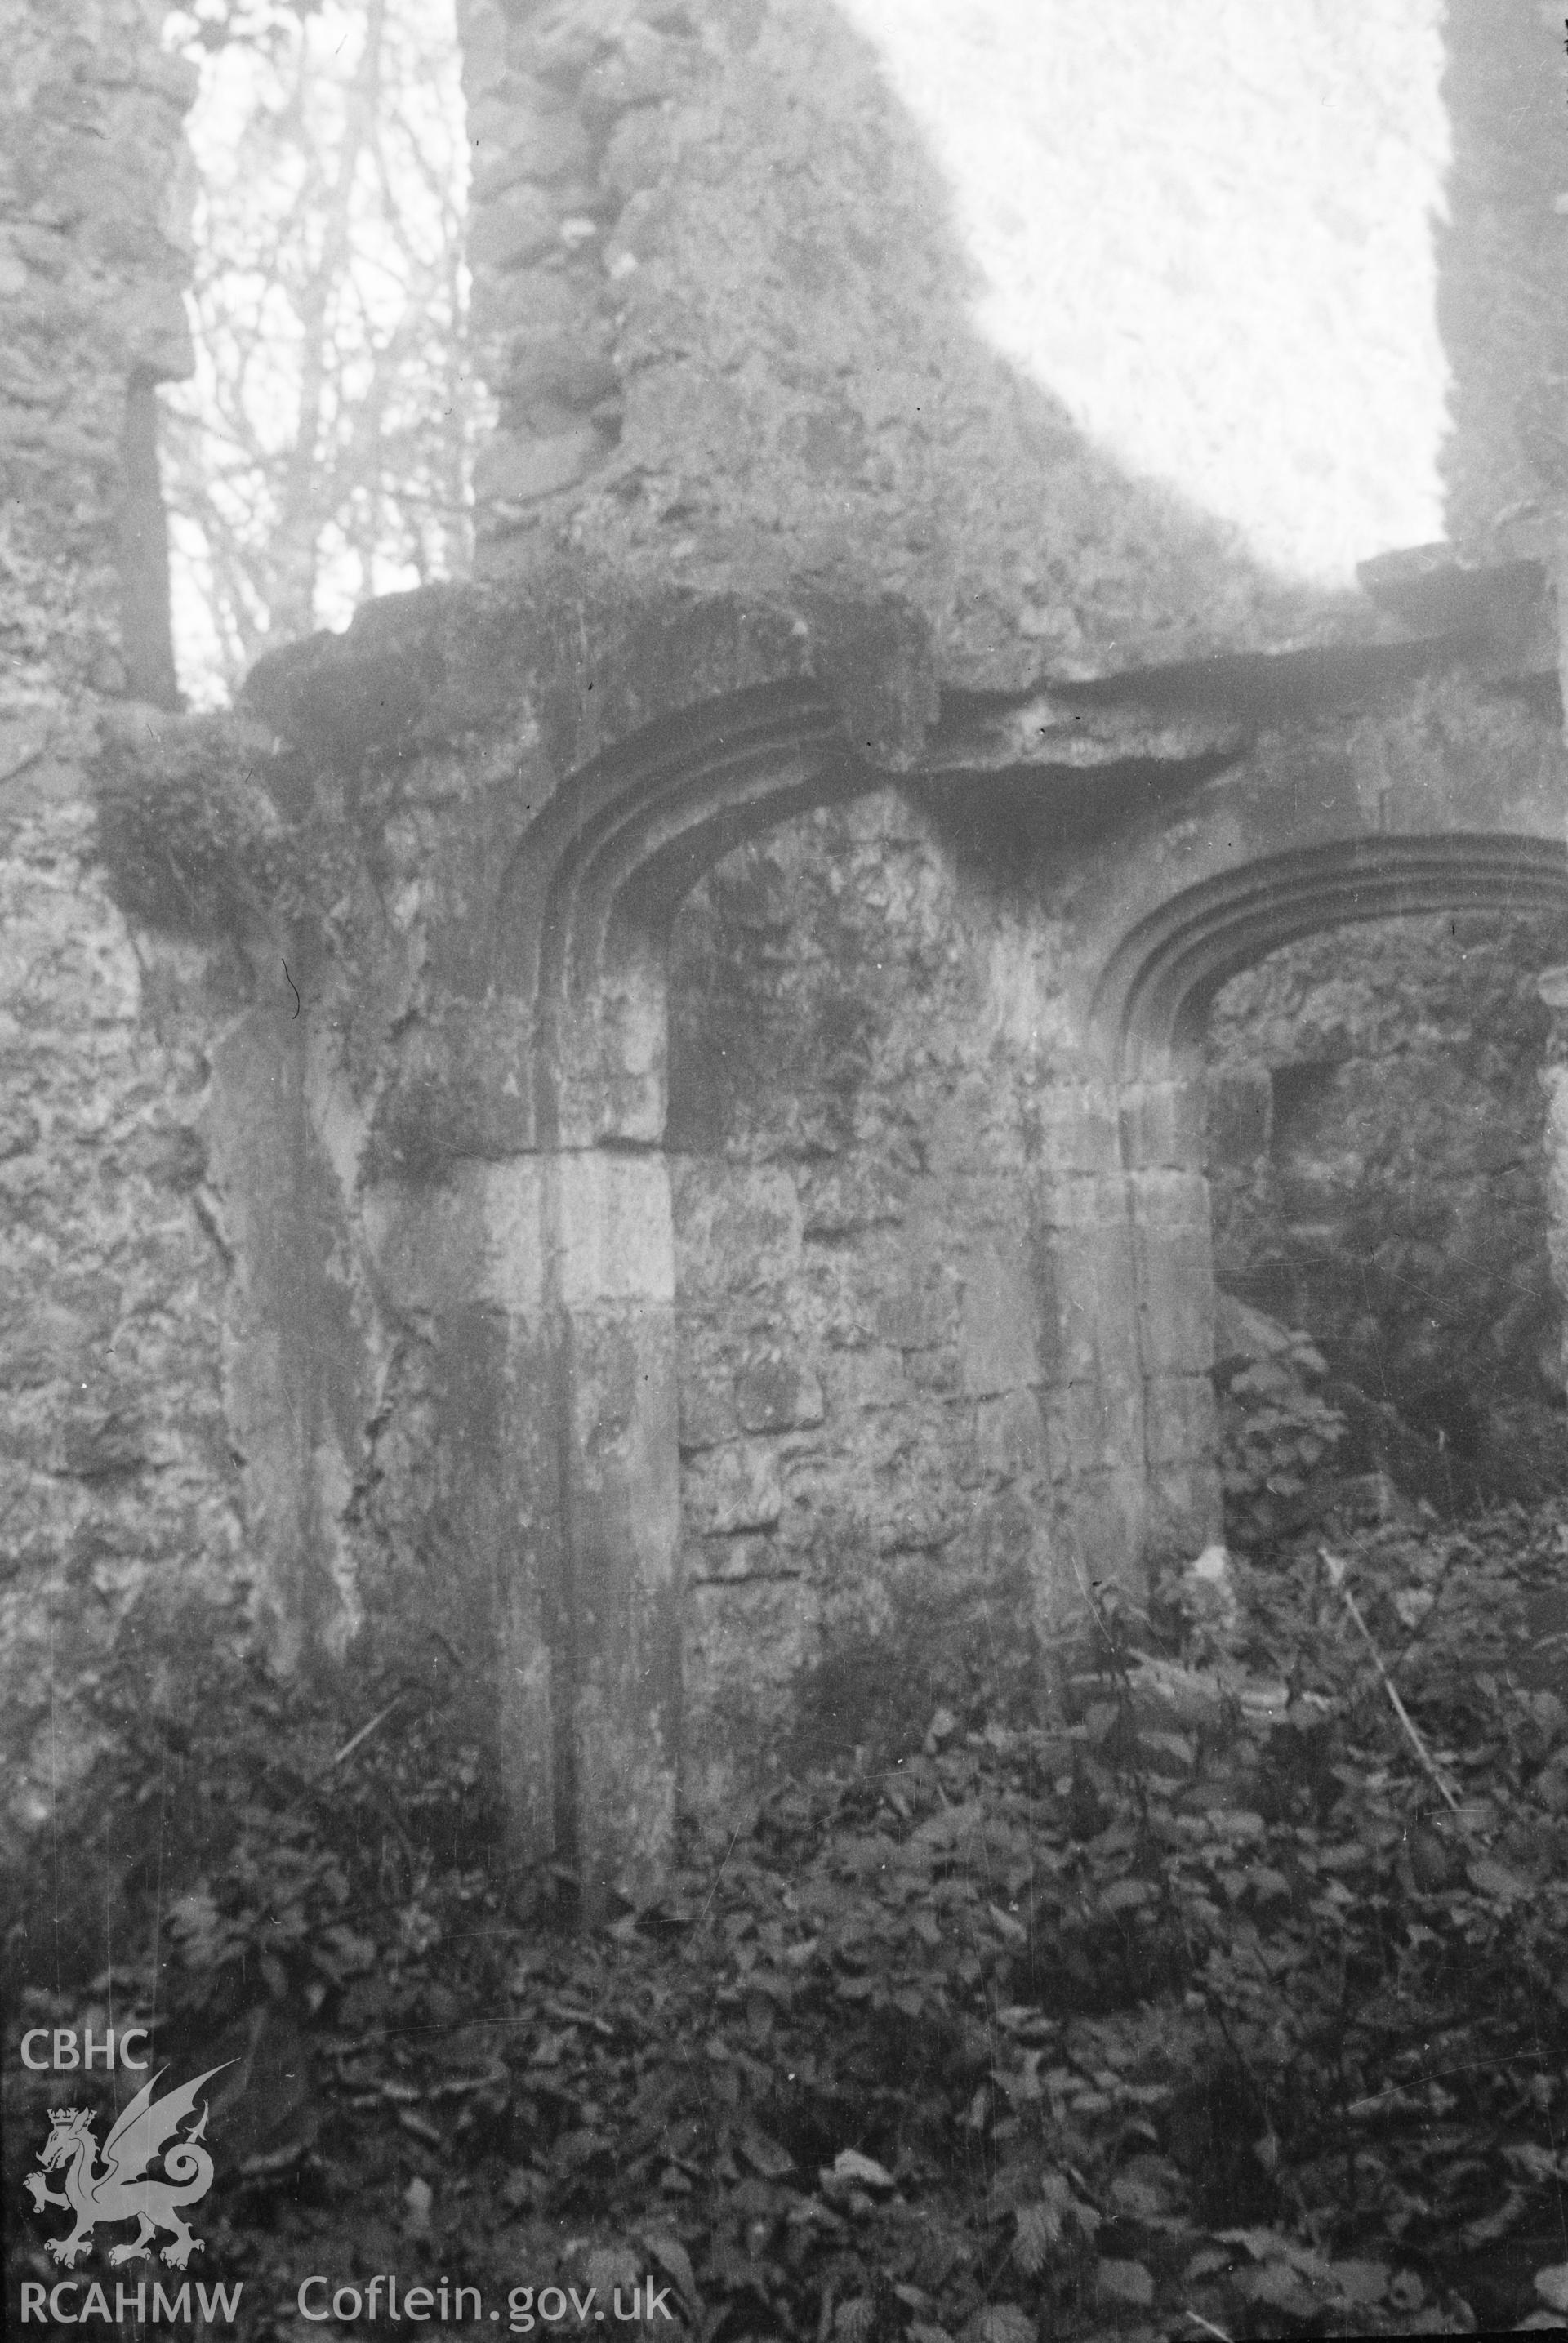 Digital copy of a nitrate negative showing Candleston Castle, Merthyr Mawr. From the Cadw Monuments in Care Collection.